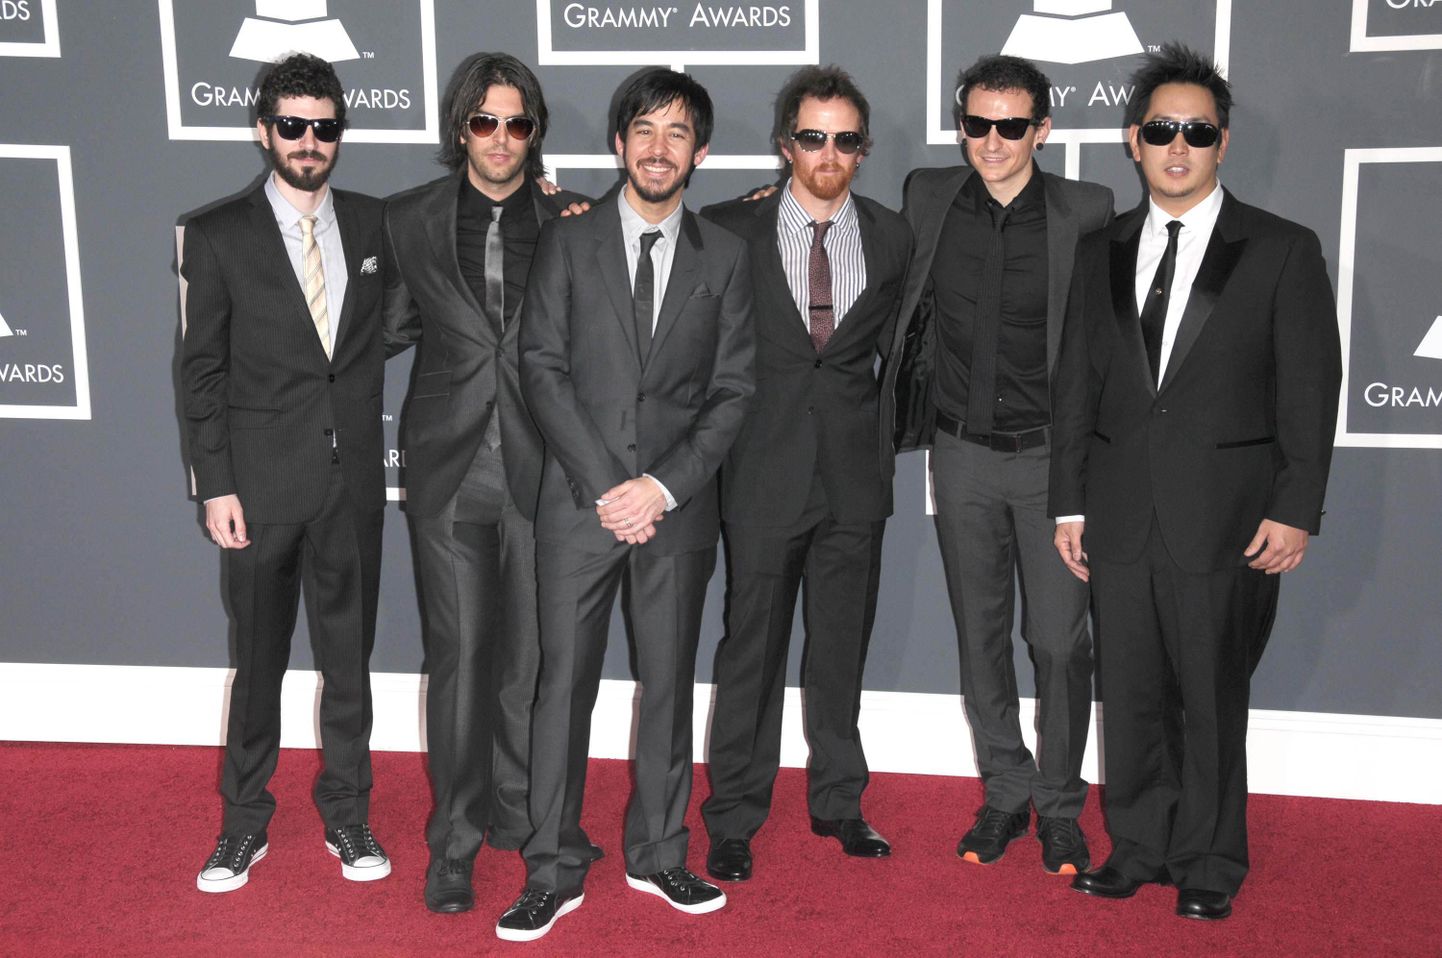 Linkin Park arrives at the Grammy Awards on Sunday, Jan. 31, 2010, in Los Angeles.